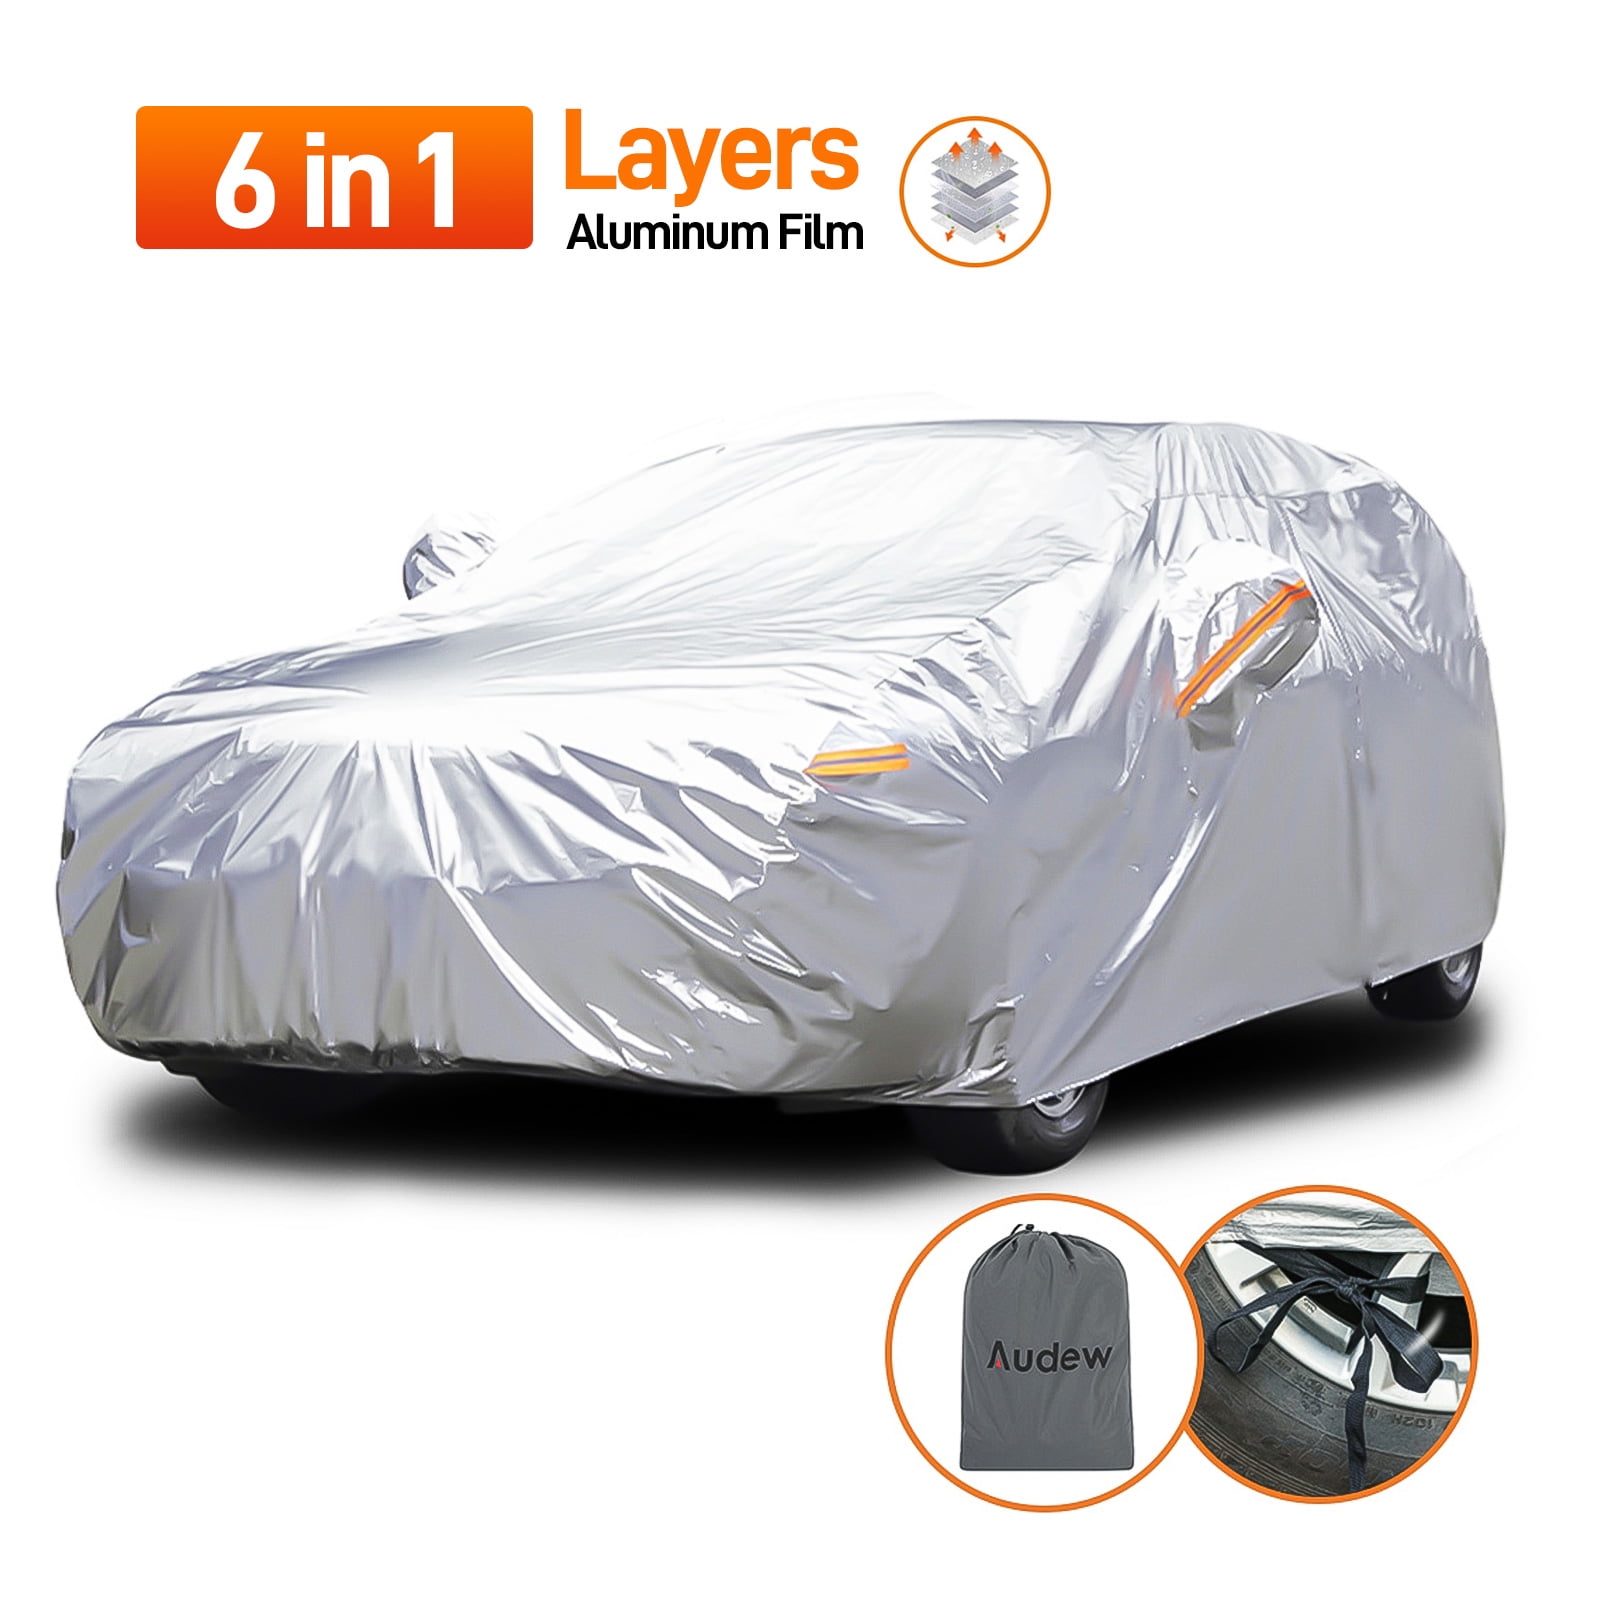 Length 191-200 Inch GUNHYI 4 Layer Car Cover Waterproof All Weather for Automobiles Outdoor Indoor Fit Sedan With Cotton and Mirror Pocket Sun Rain Snow Dust UV Protection 